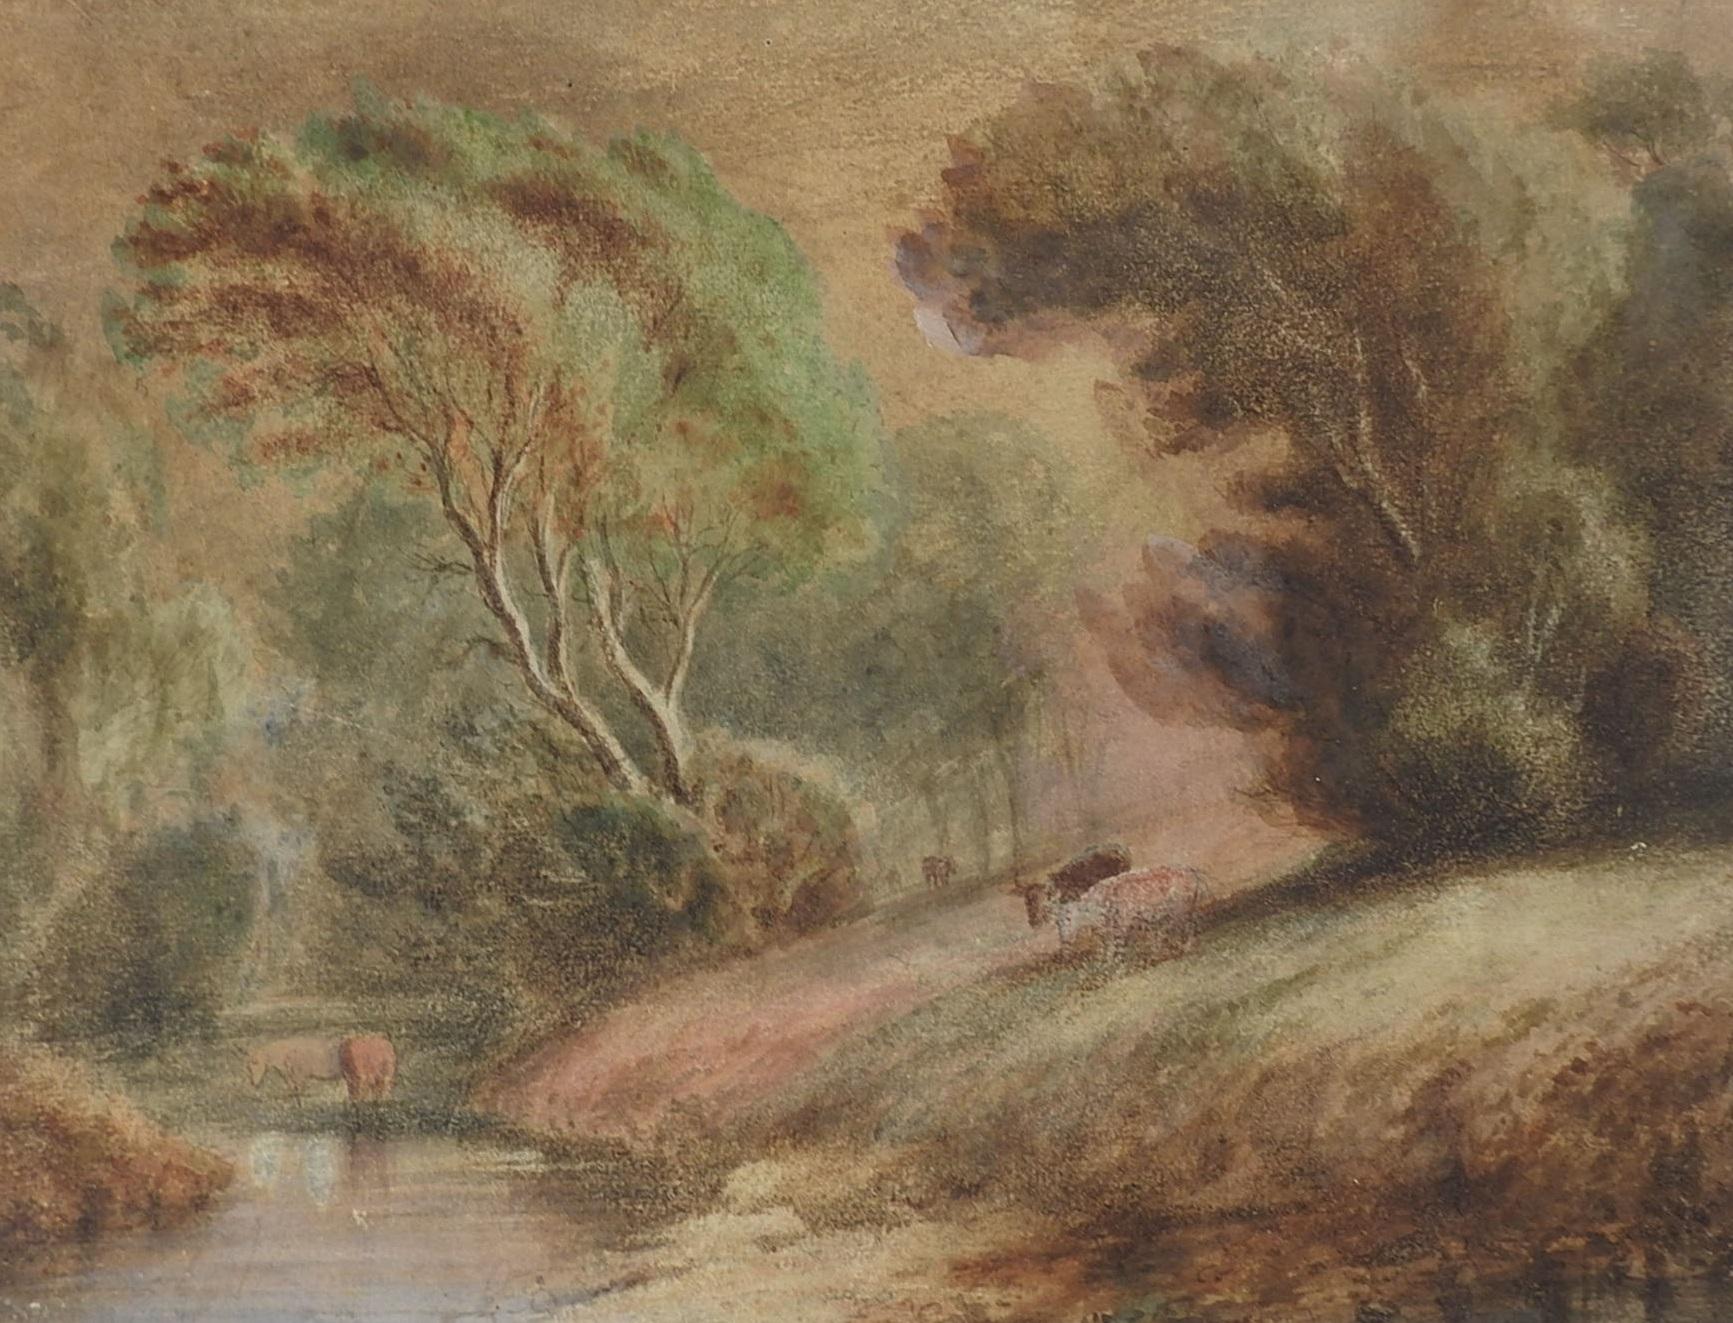 Antique late 19th century watercolor on paper pastoral painting, Wooded landscape with cows drinking from a stream. Unsigned. Unframed, edge wear, age toning.